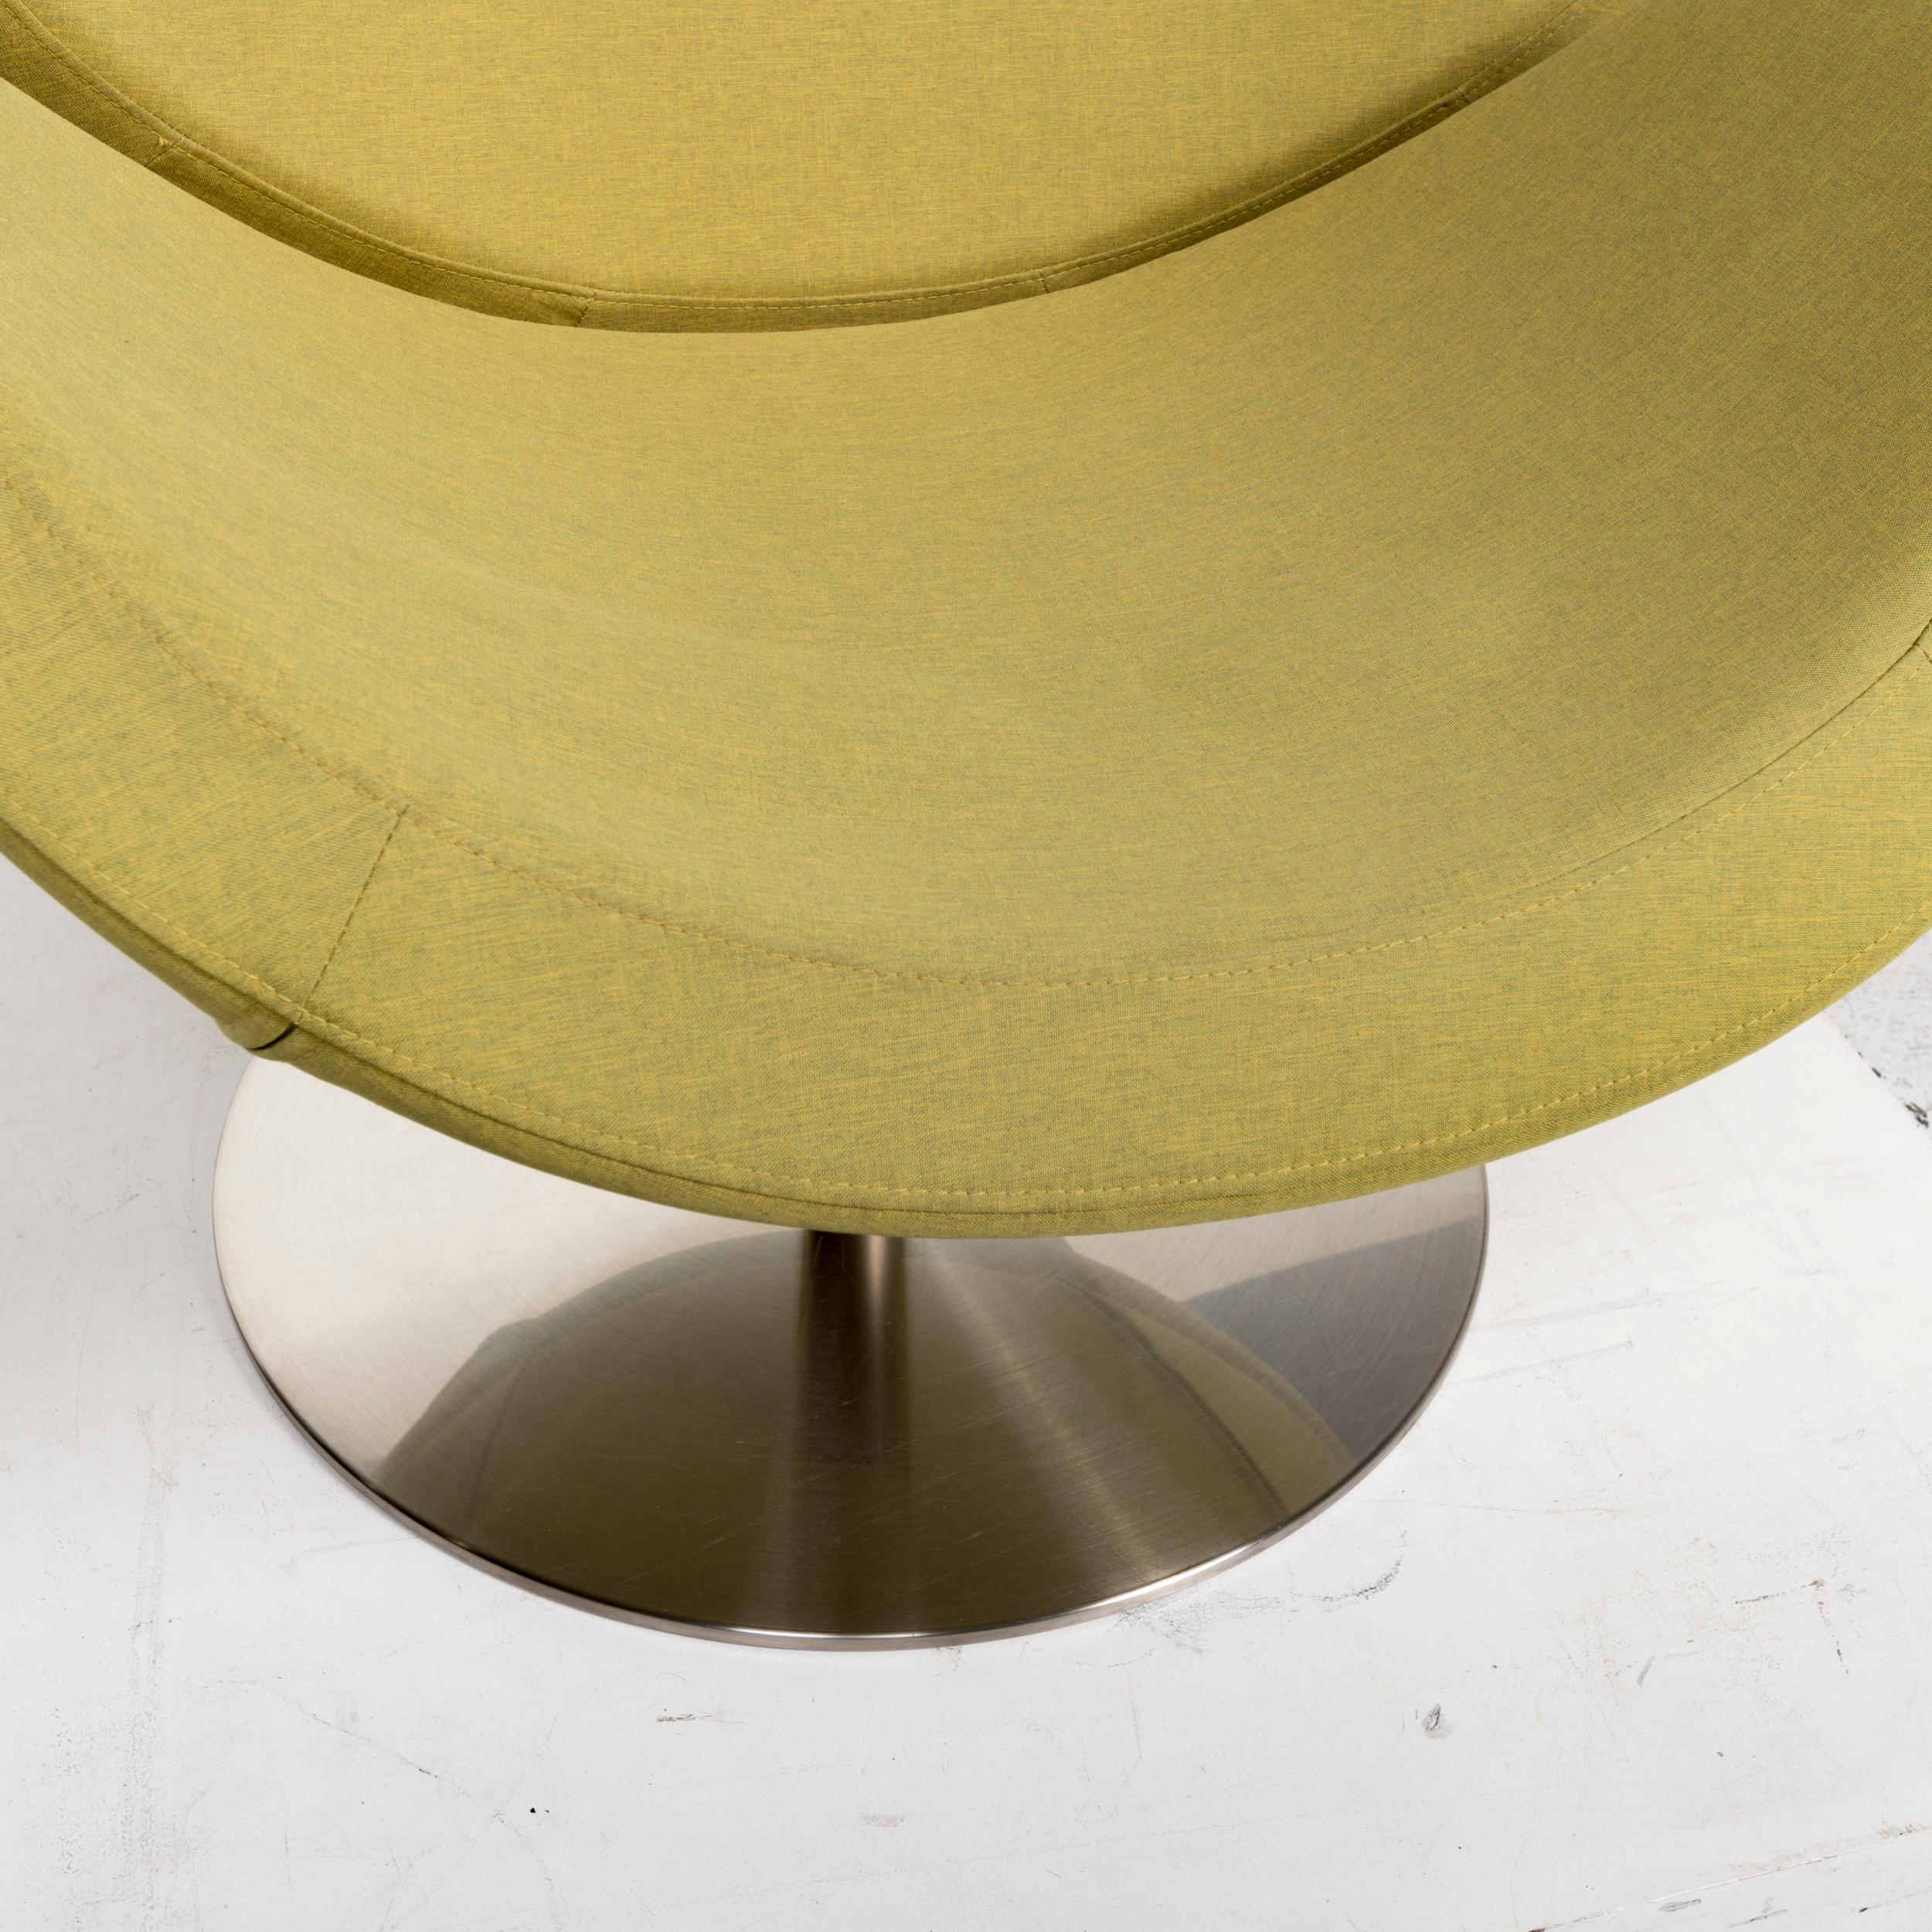 We present to you a BoConcept Ogi fabric armchair incl. Stool green lime green swivel chair.

Product measurements in centimeters:

Depth 87
Width 80
Height 86
Seat height 48
Rest height 59
Seat depth 54
Seat width 46
Back height